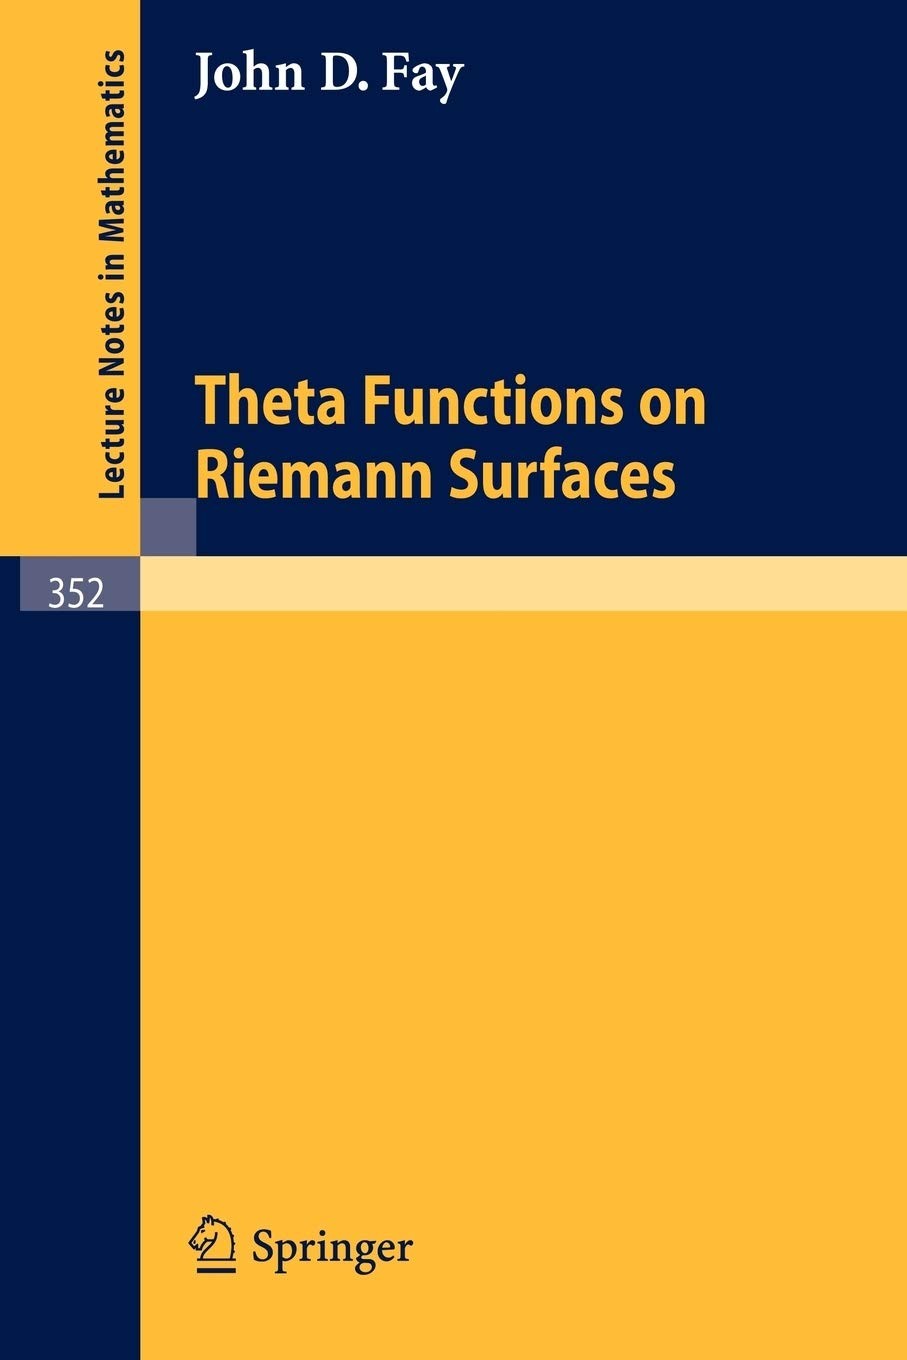 Theta Functions on Riemann Surfaces